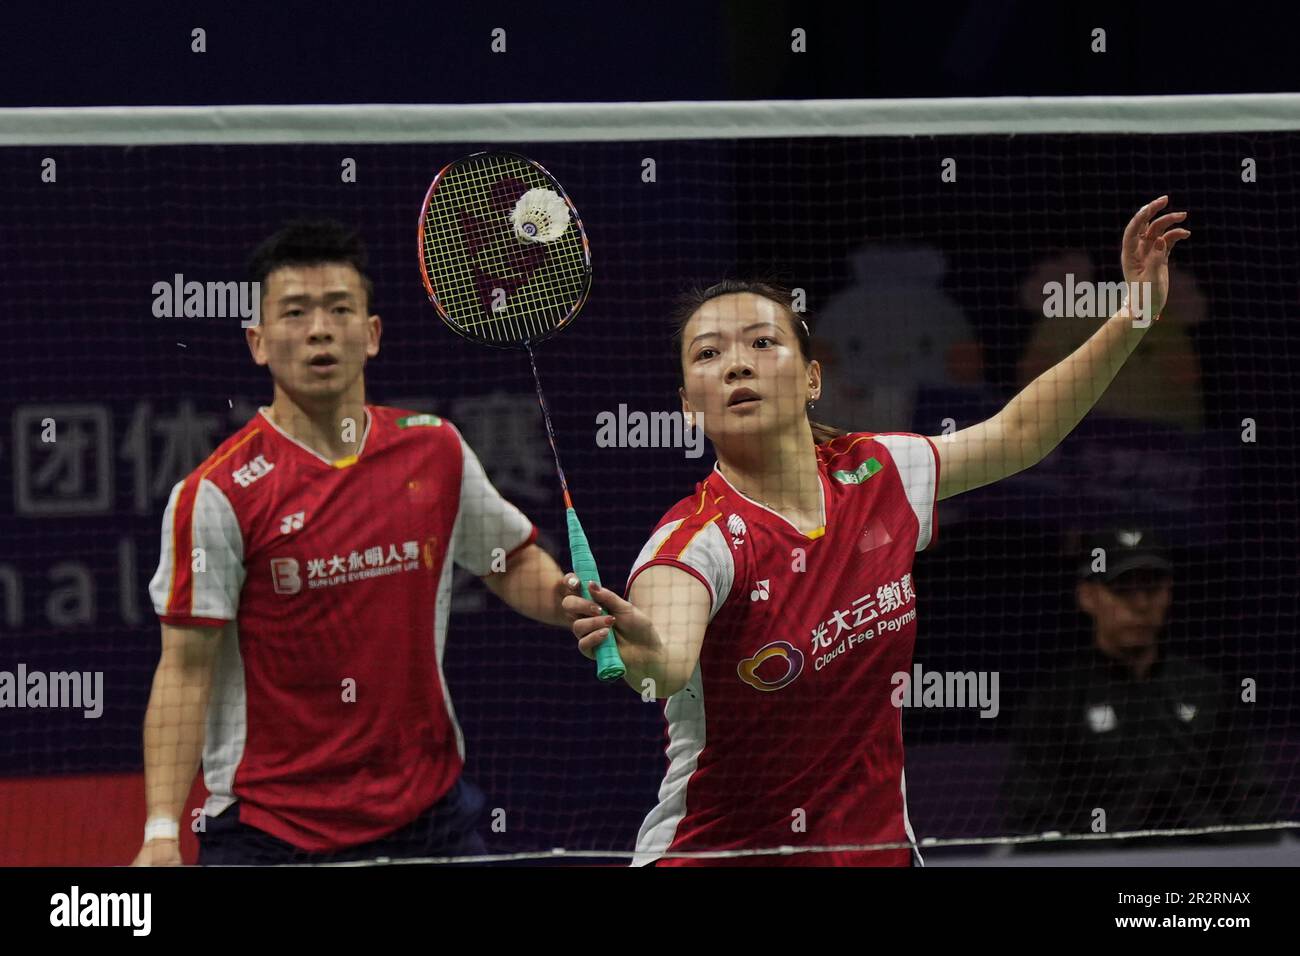 Huang Yaqiong of China returns a shot with teammate Zheng Siwei during their mixed doubles badminton final match against Seo Seung Jae and Chae Yu Jung of South Korea at the BWF